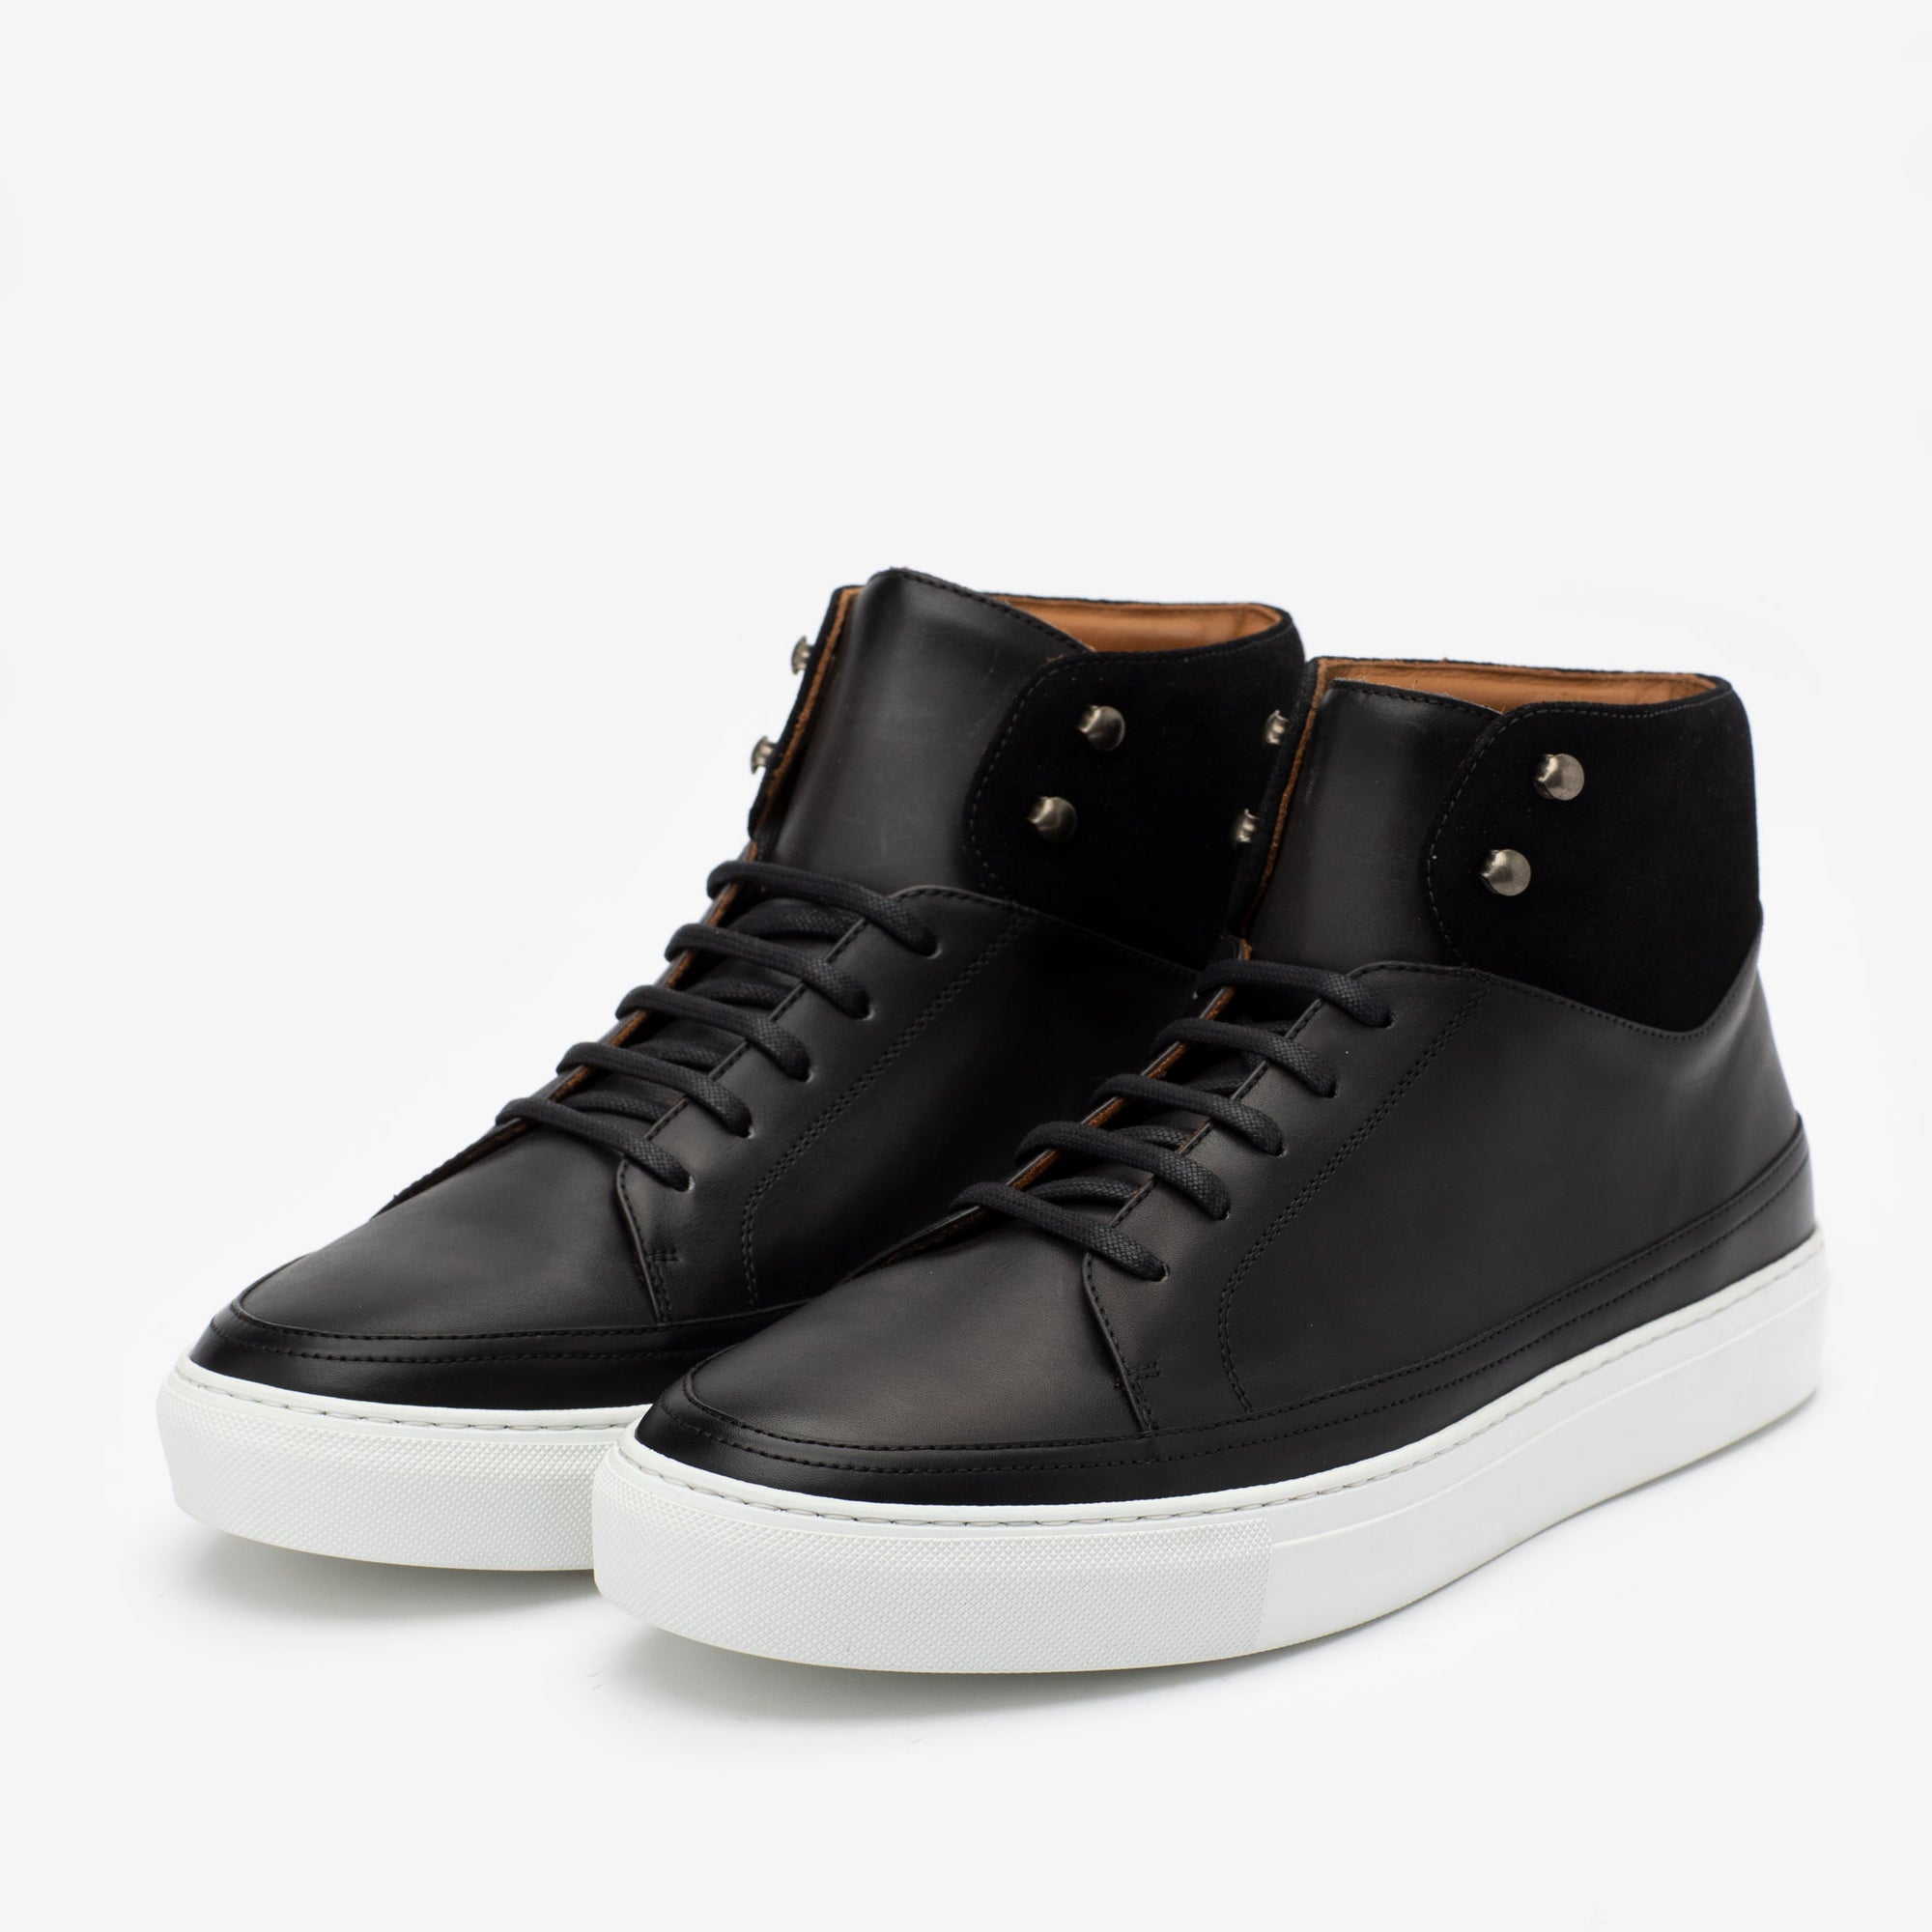 The Fifth Ave Hightop Sneaker in Black {{rollover}}